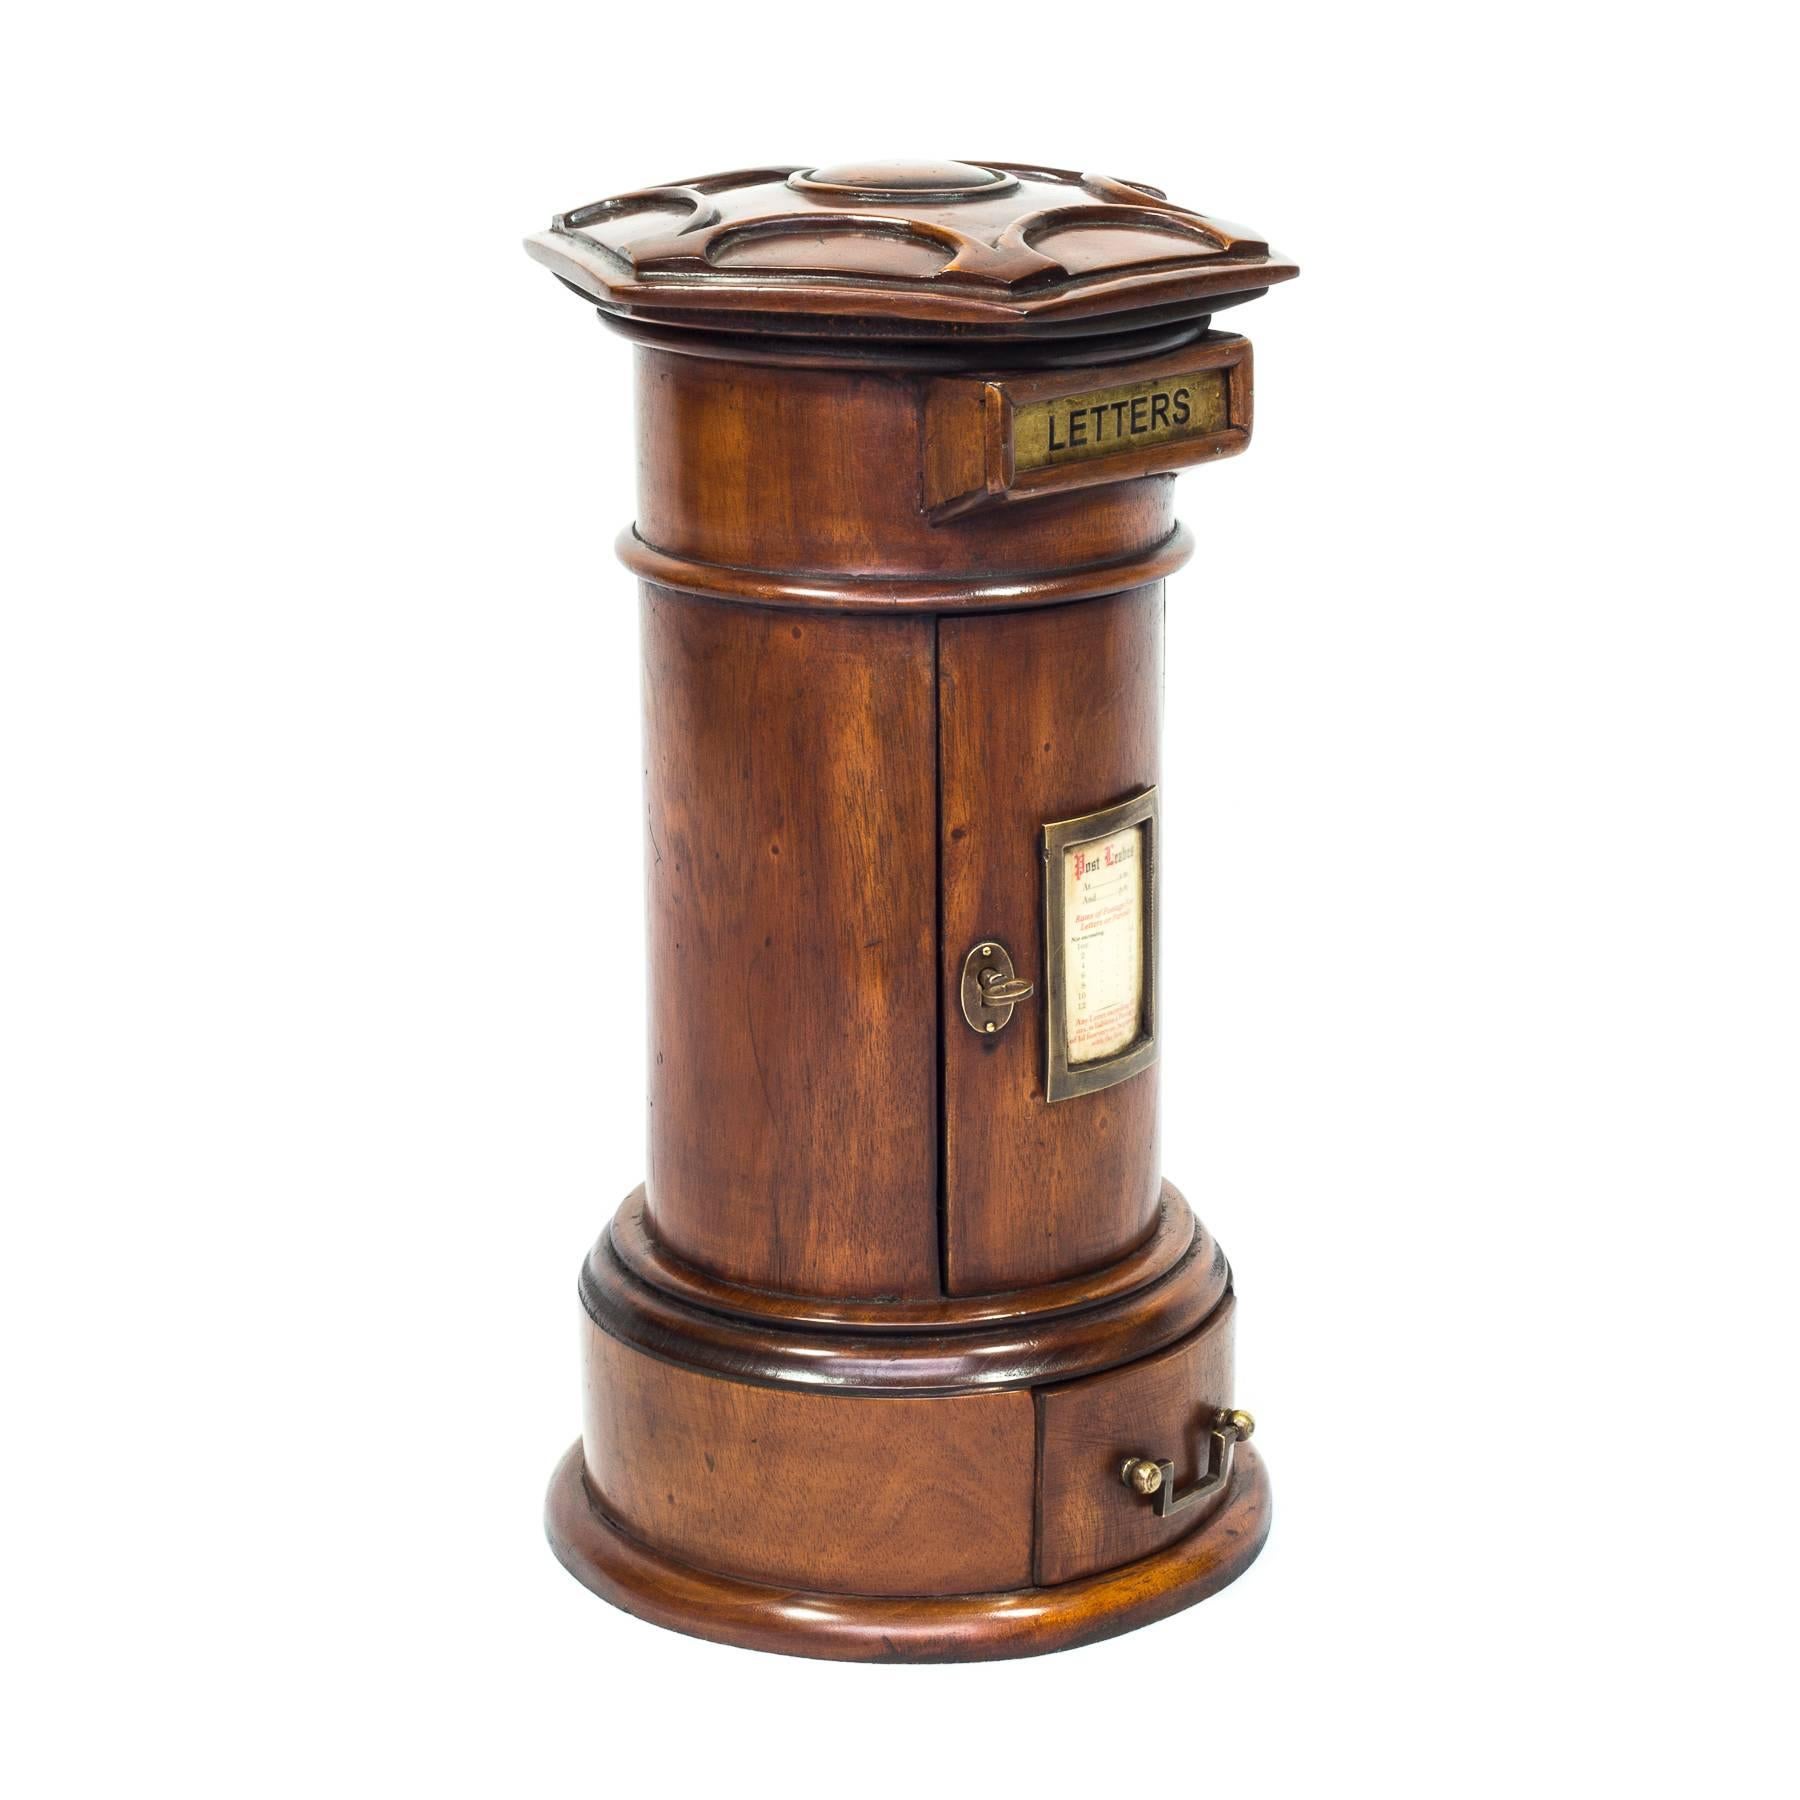 An excellent quality mahogany Victorian style country house pillar post box. The hexagonal domed roof carved with adjoining half moons above each edge and with central dome, the posting slot with a brass shutter incised 'LETTERS', the locking door